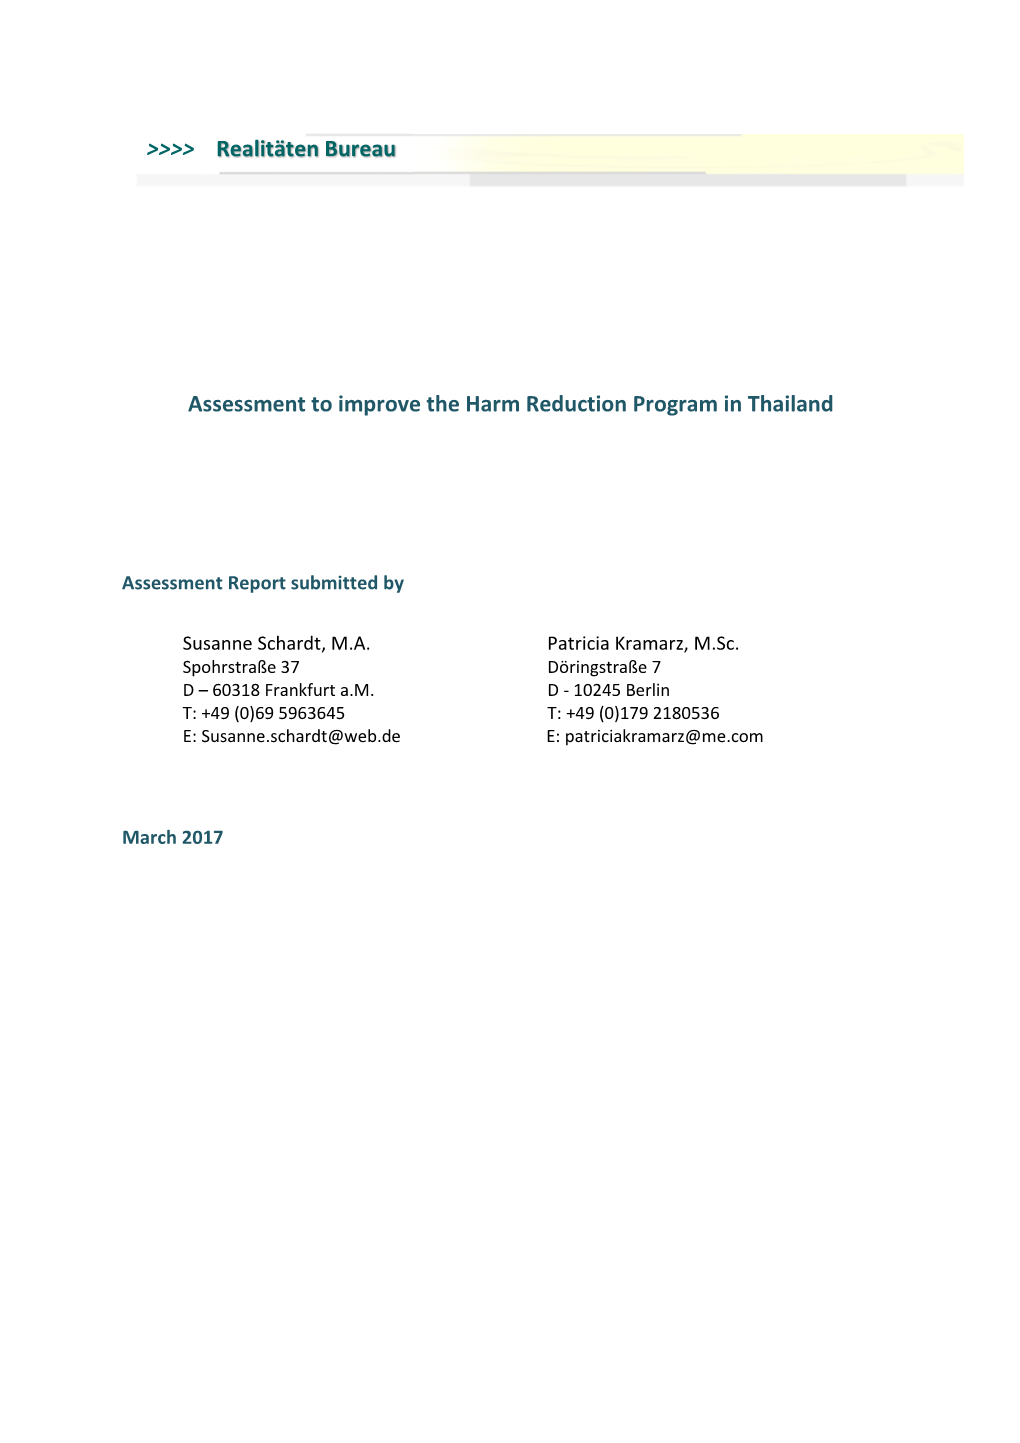 Assessment to Improve the Harm Reduction Program in Thailand